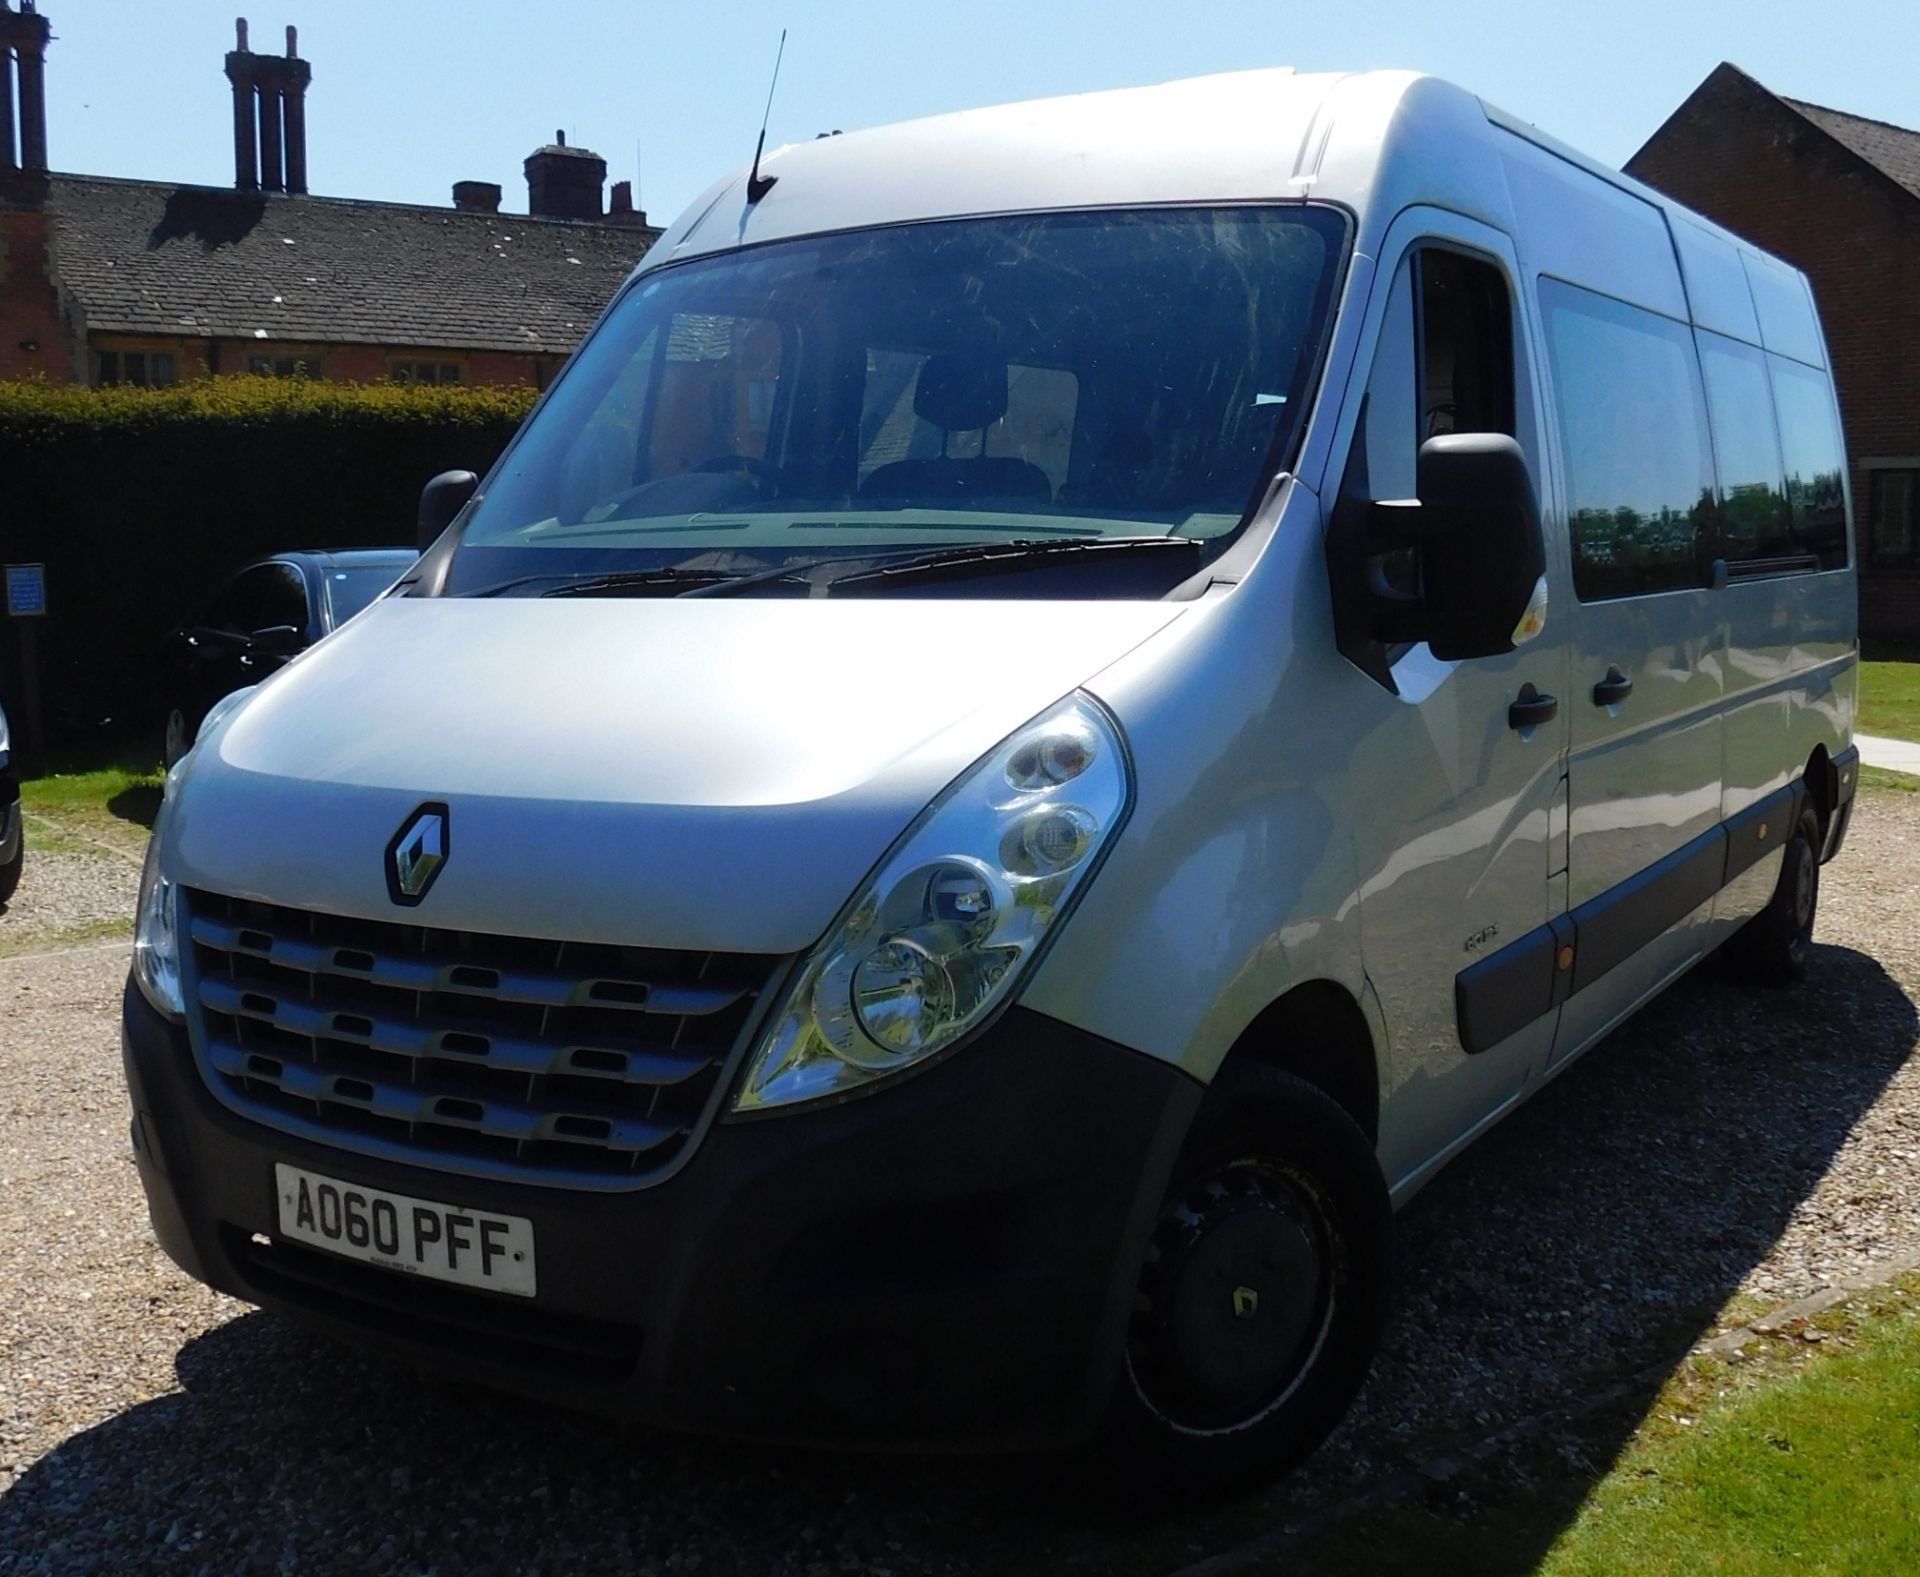 Renault Master LWB FWD LM35dCi 125 8-Seat Mini-Bus, Registration AO60 PFF, First Registered 30th - Image 2 of 23